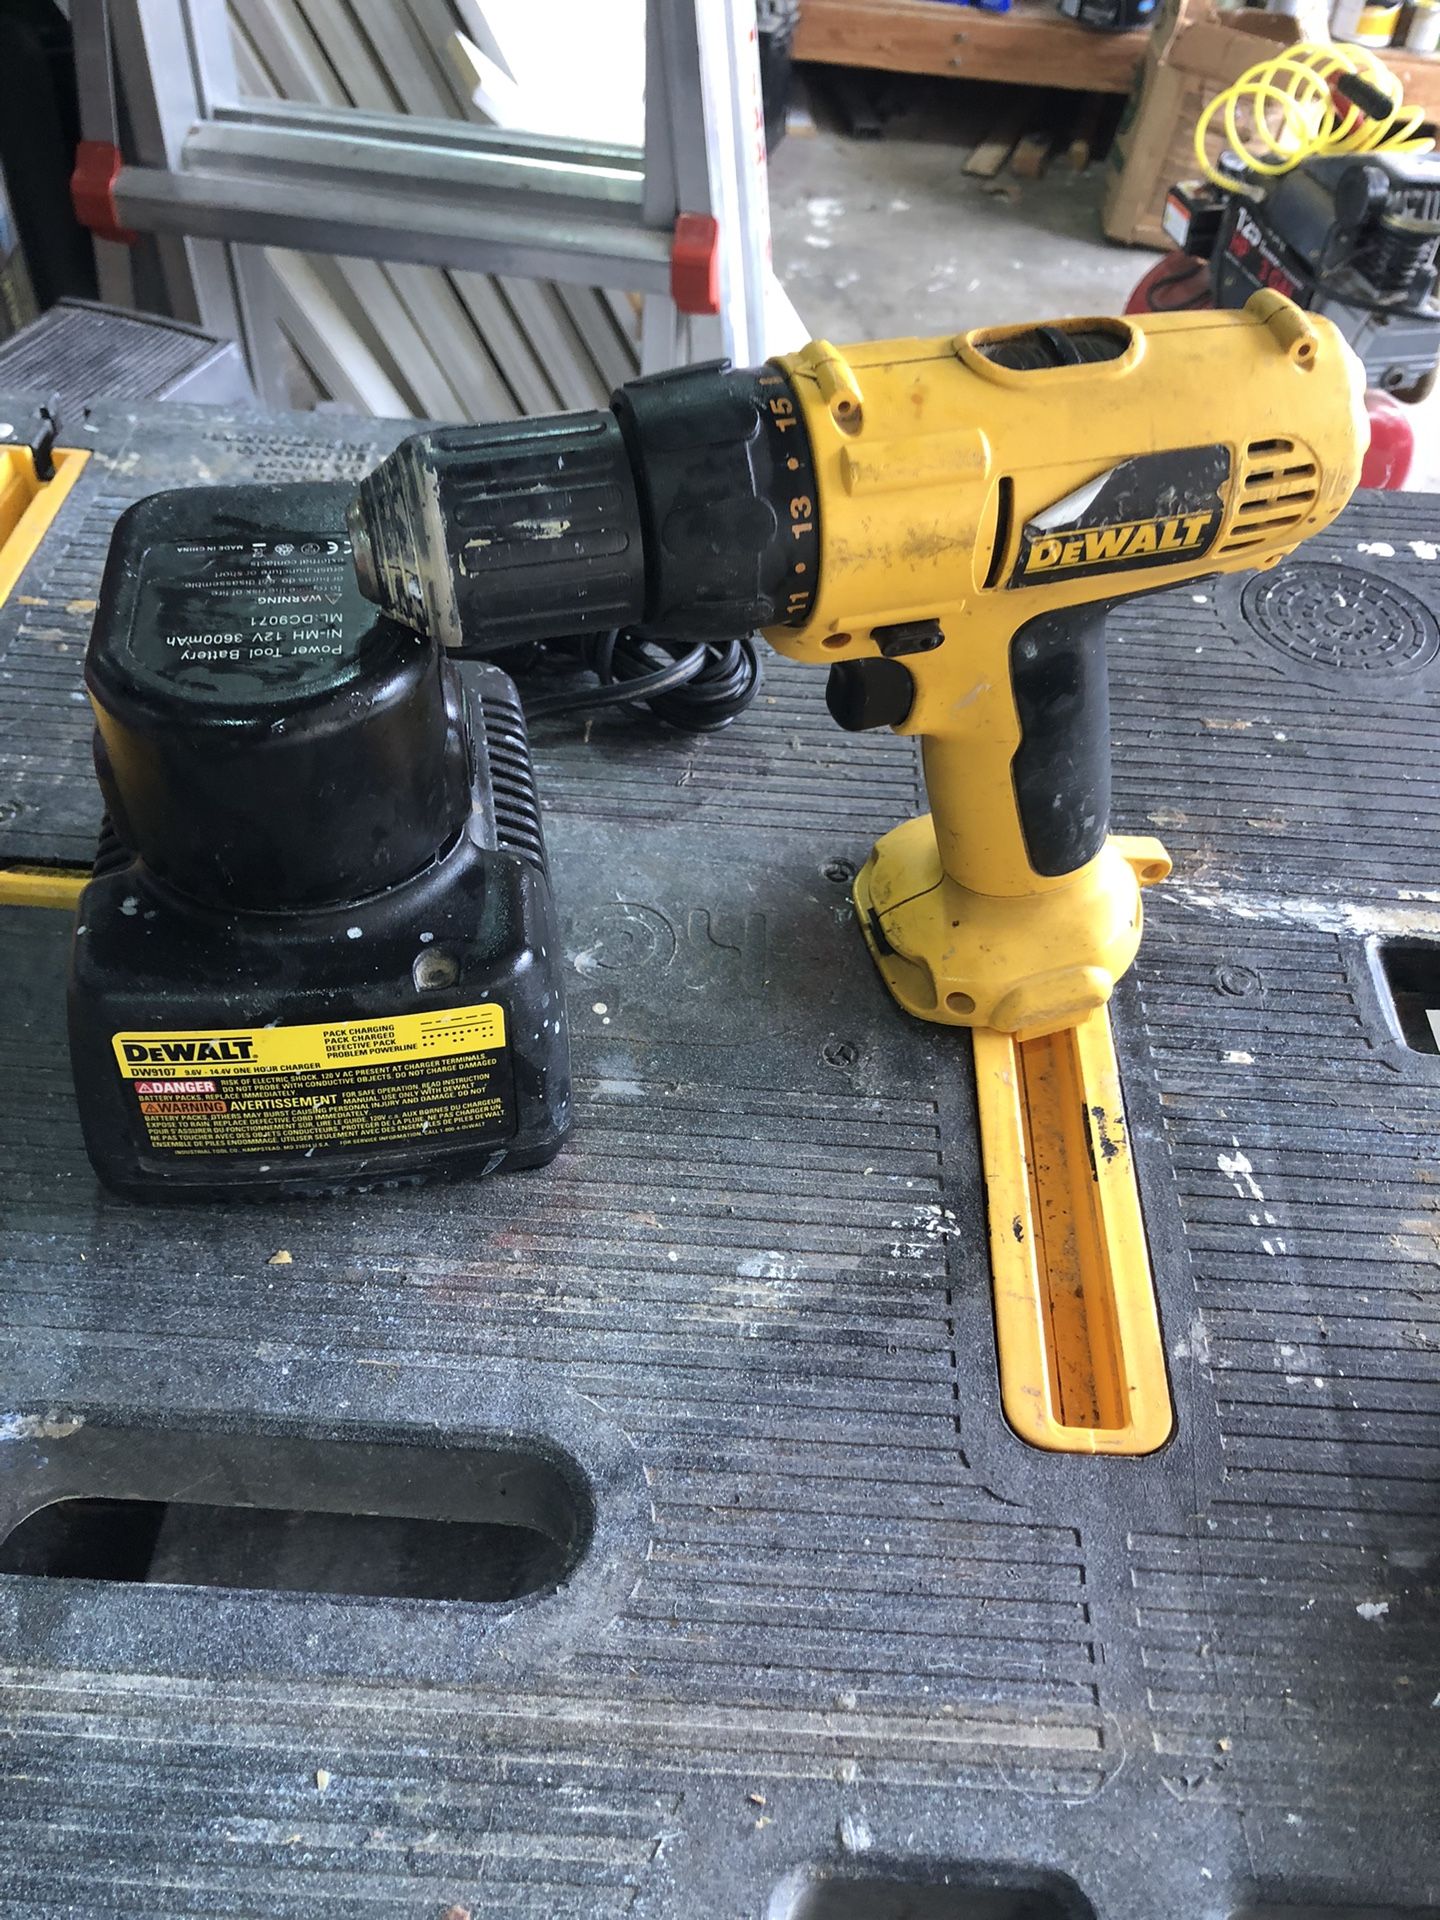 DeWalt cordless drill with battery and charger